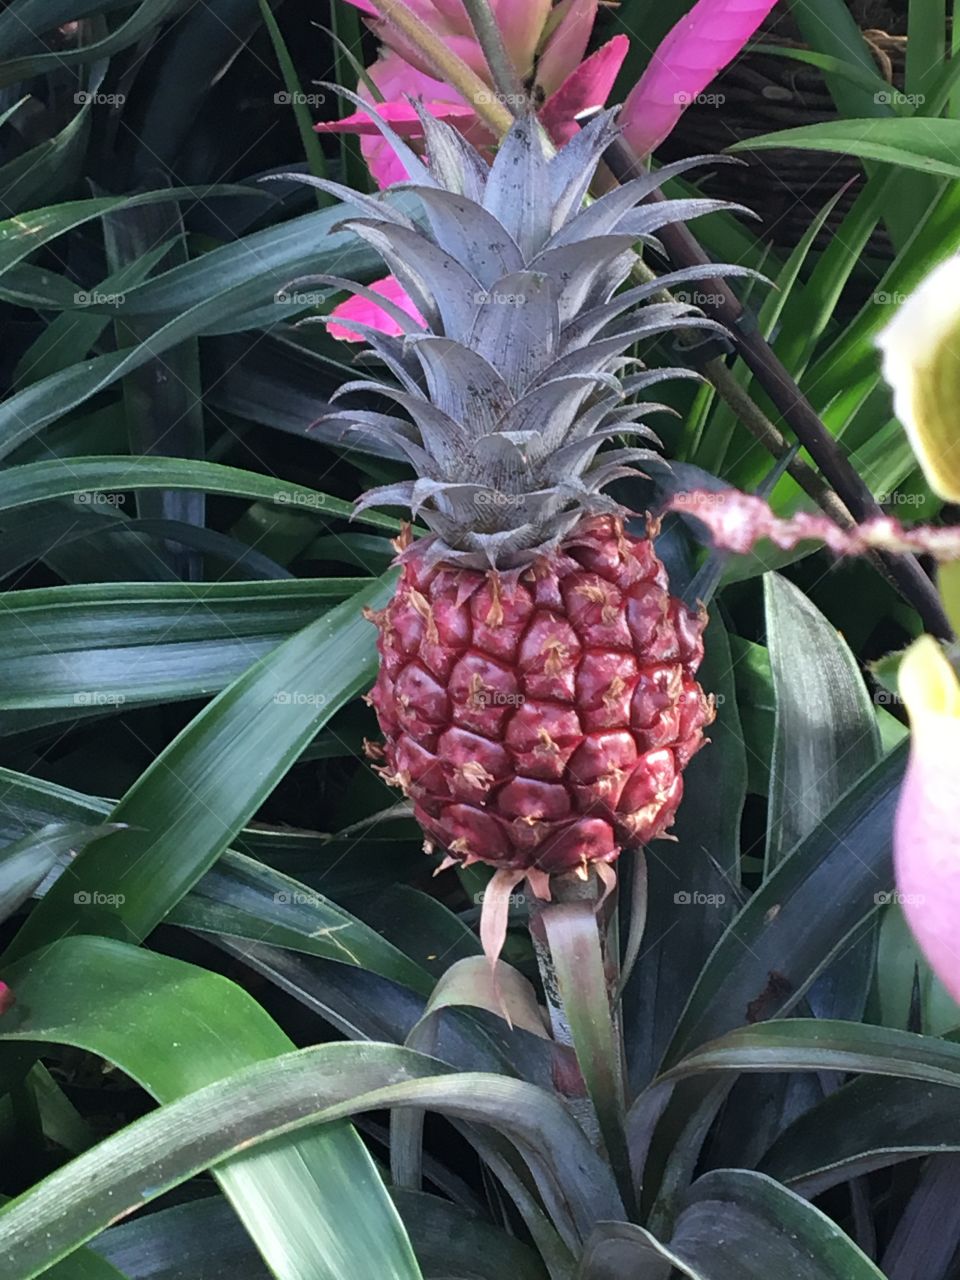 Little pineapple growing amongst the orchids